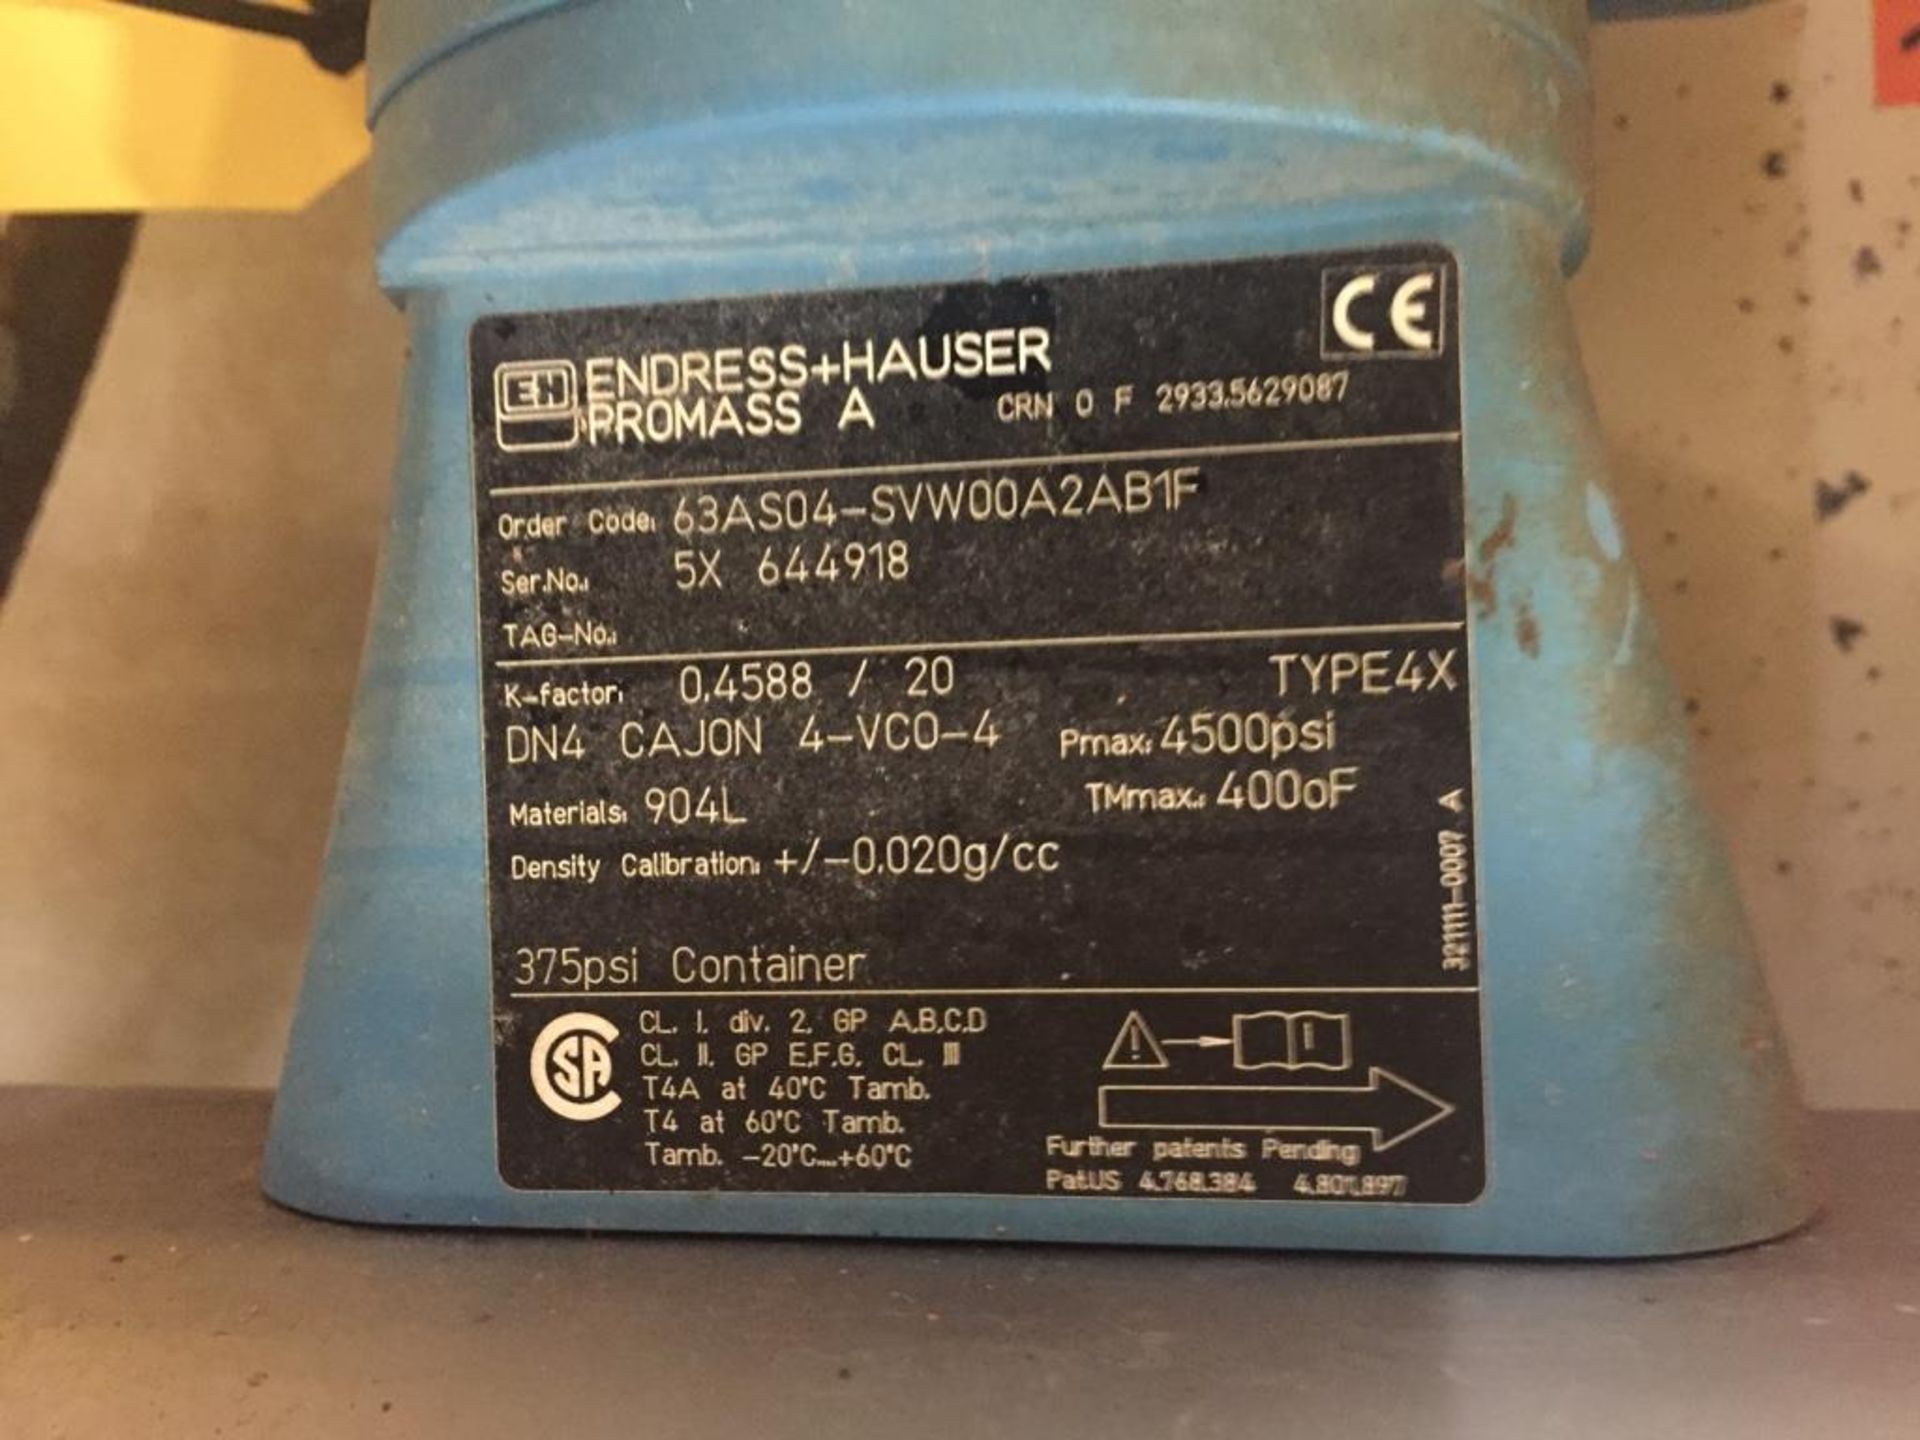 Endress + Hauser Promass A 63AS04-SVW00A2AB1F Mass Flow Meter - Image 2 of 2